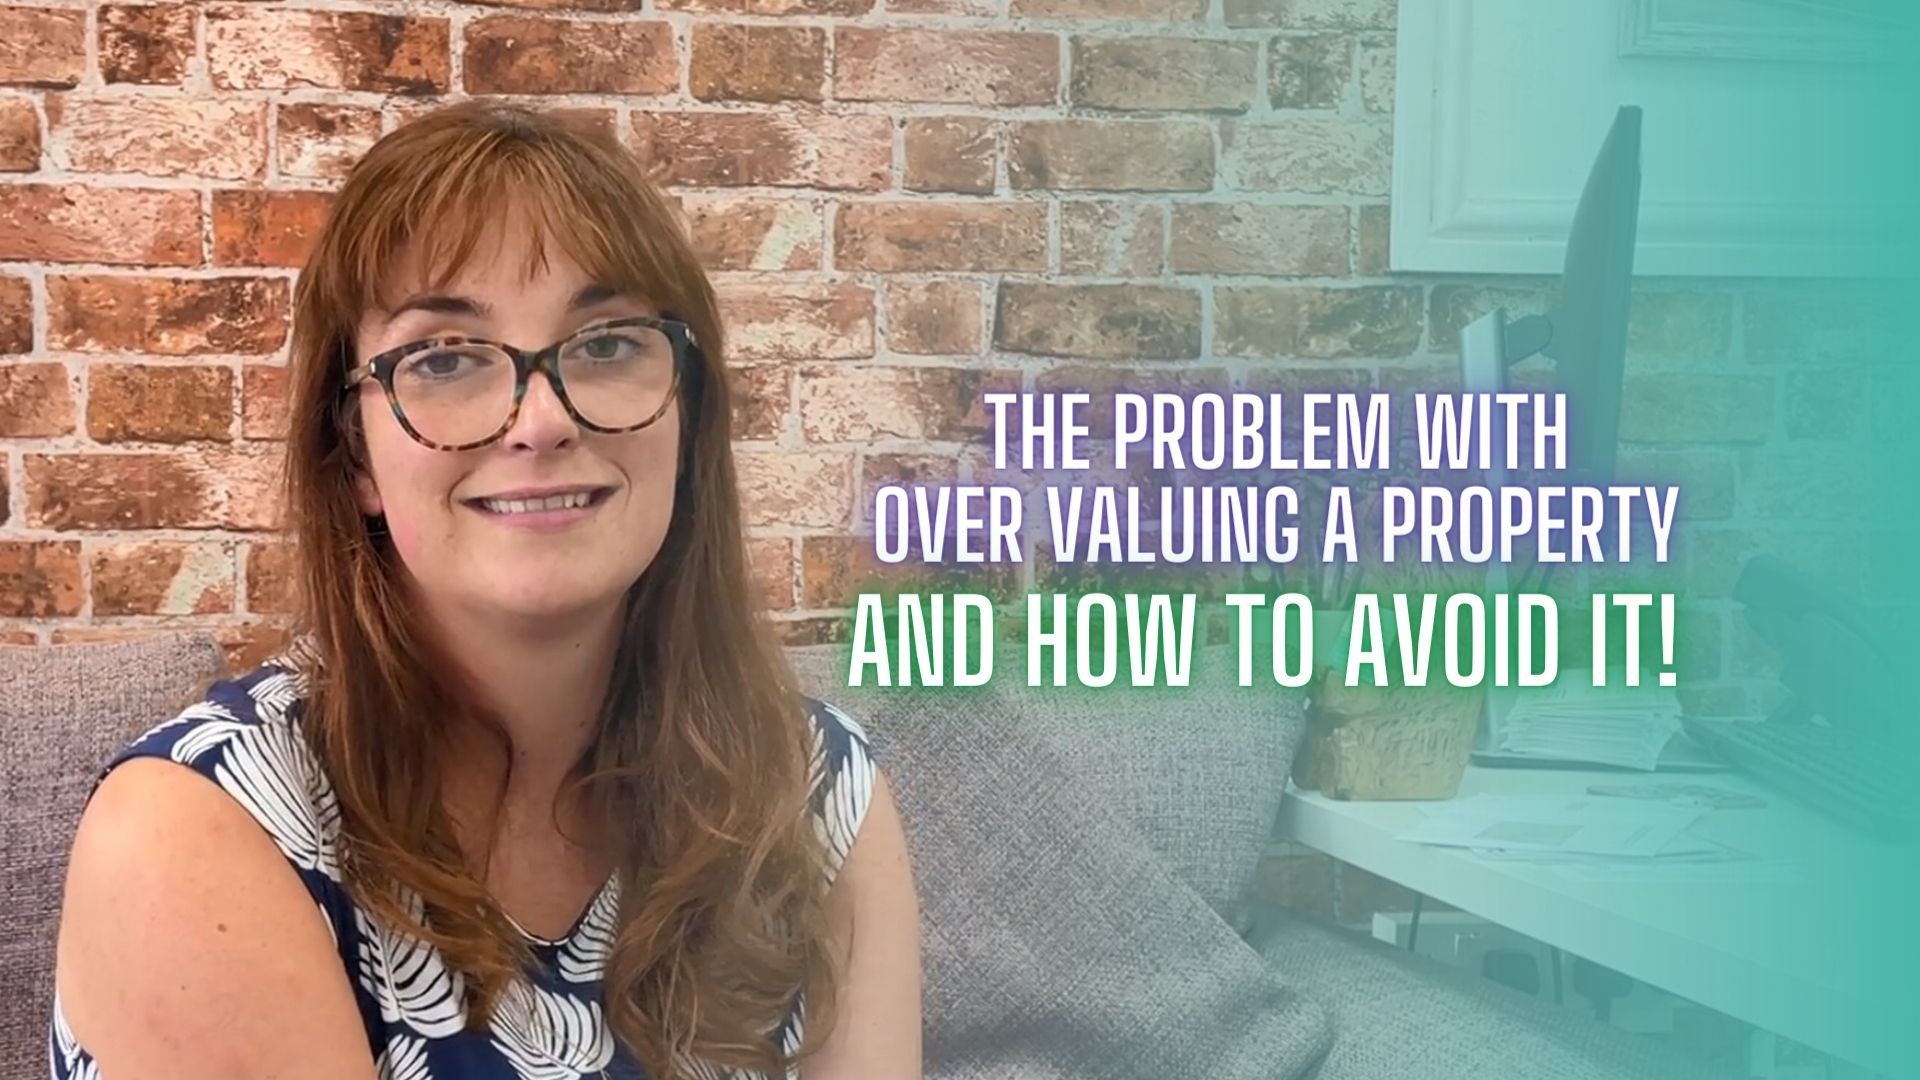 VIDEO: The Problem With Over Valuing A Property, And How To Avoid It